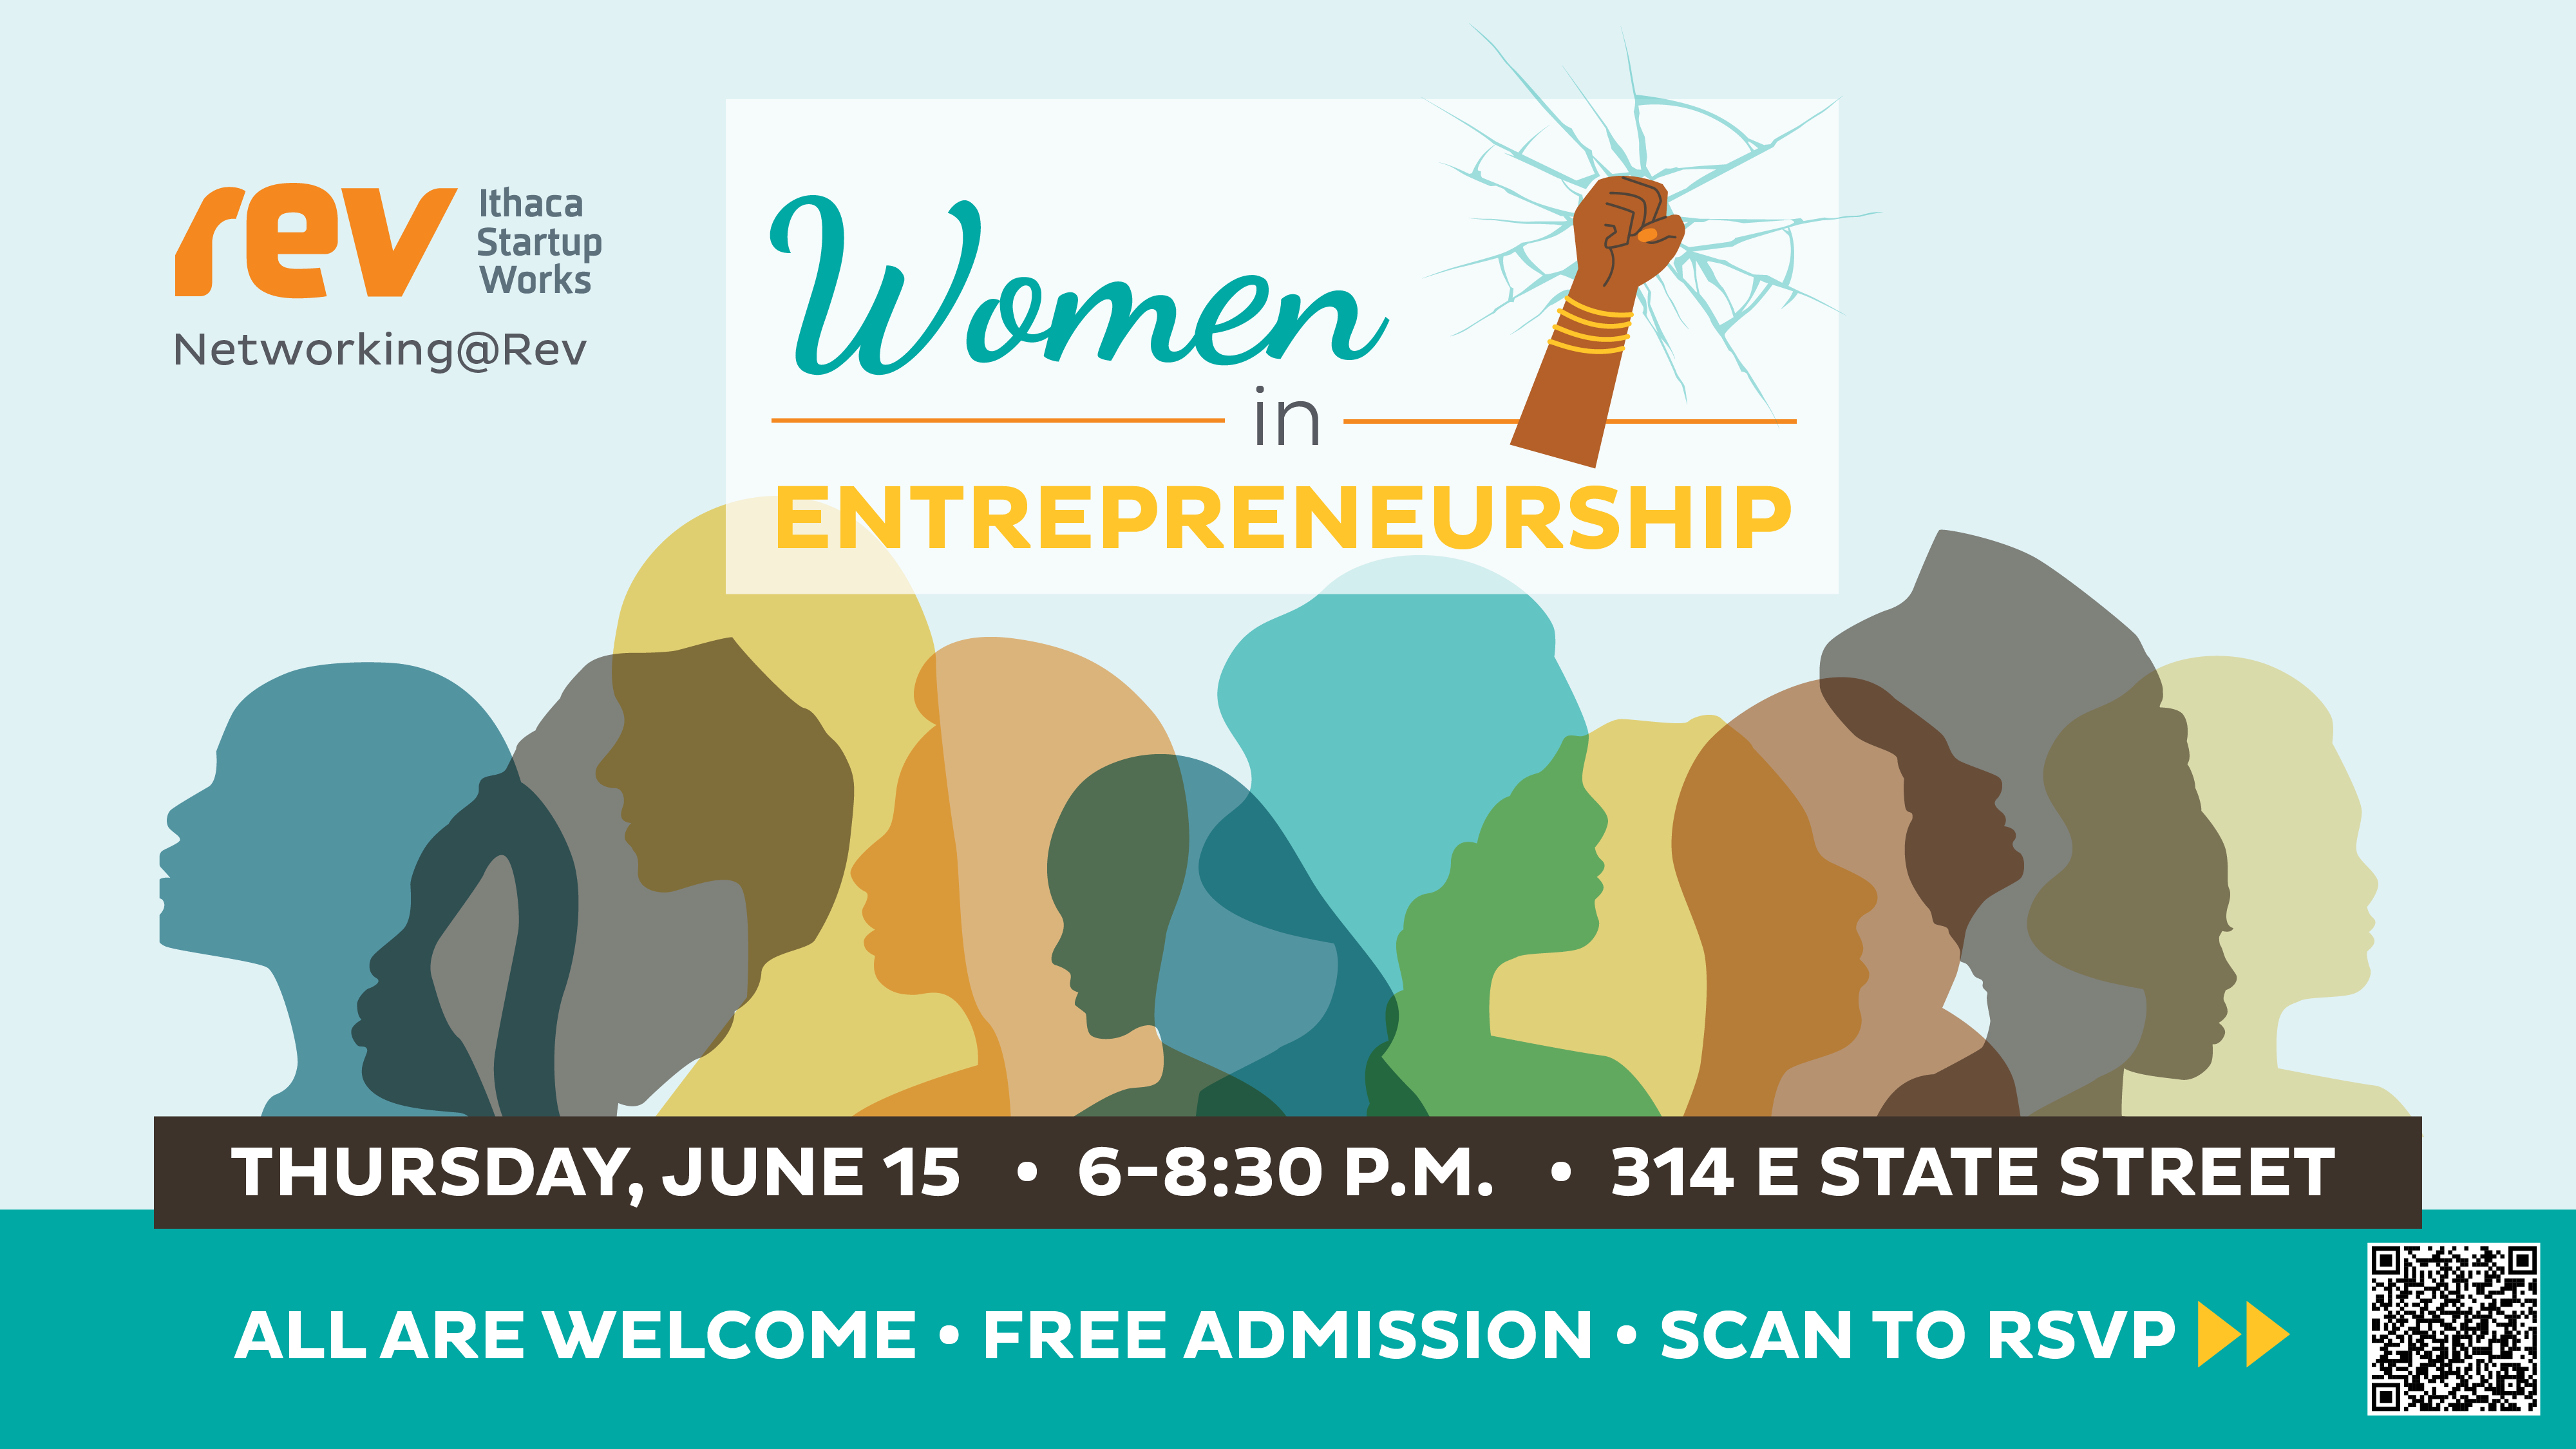 Graphic: Networking@Rev: Women in Entrepreneurship, Thursday, June 15 from 6 to 8:30 pm at Rev: Ithaca Startup Works.